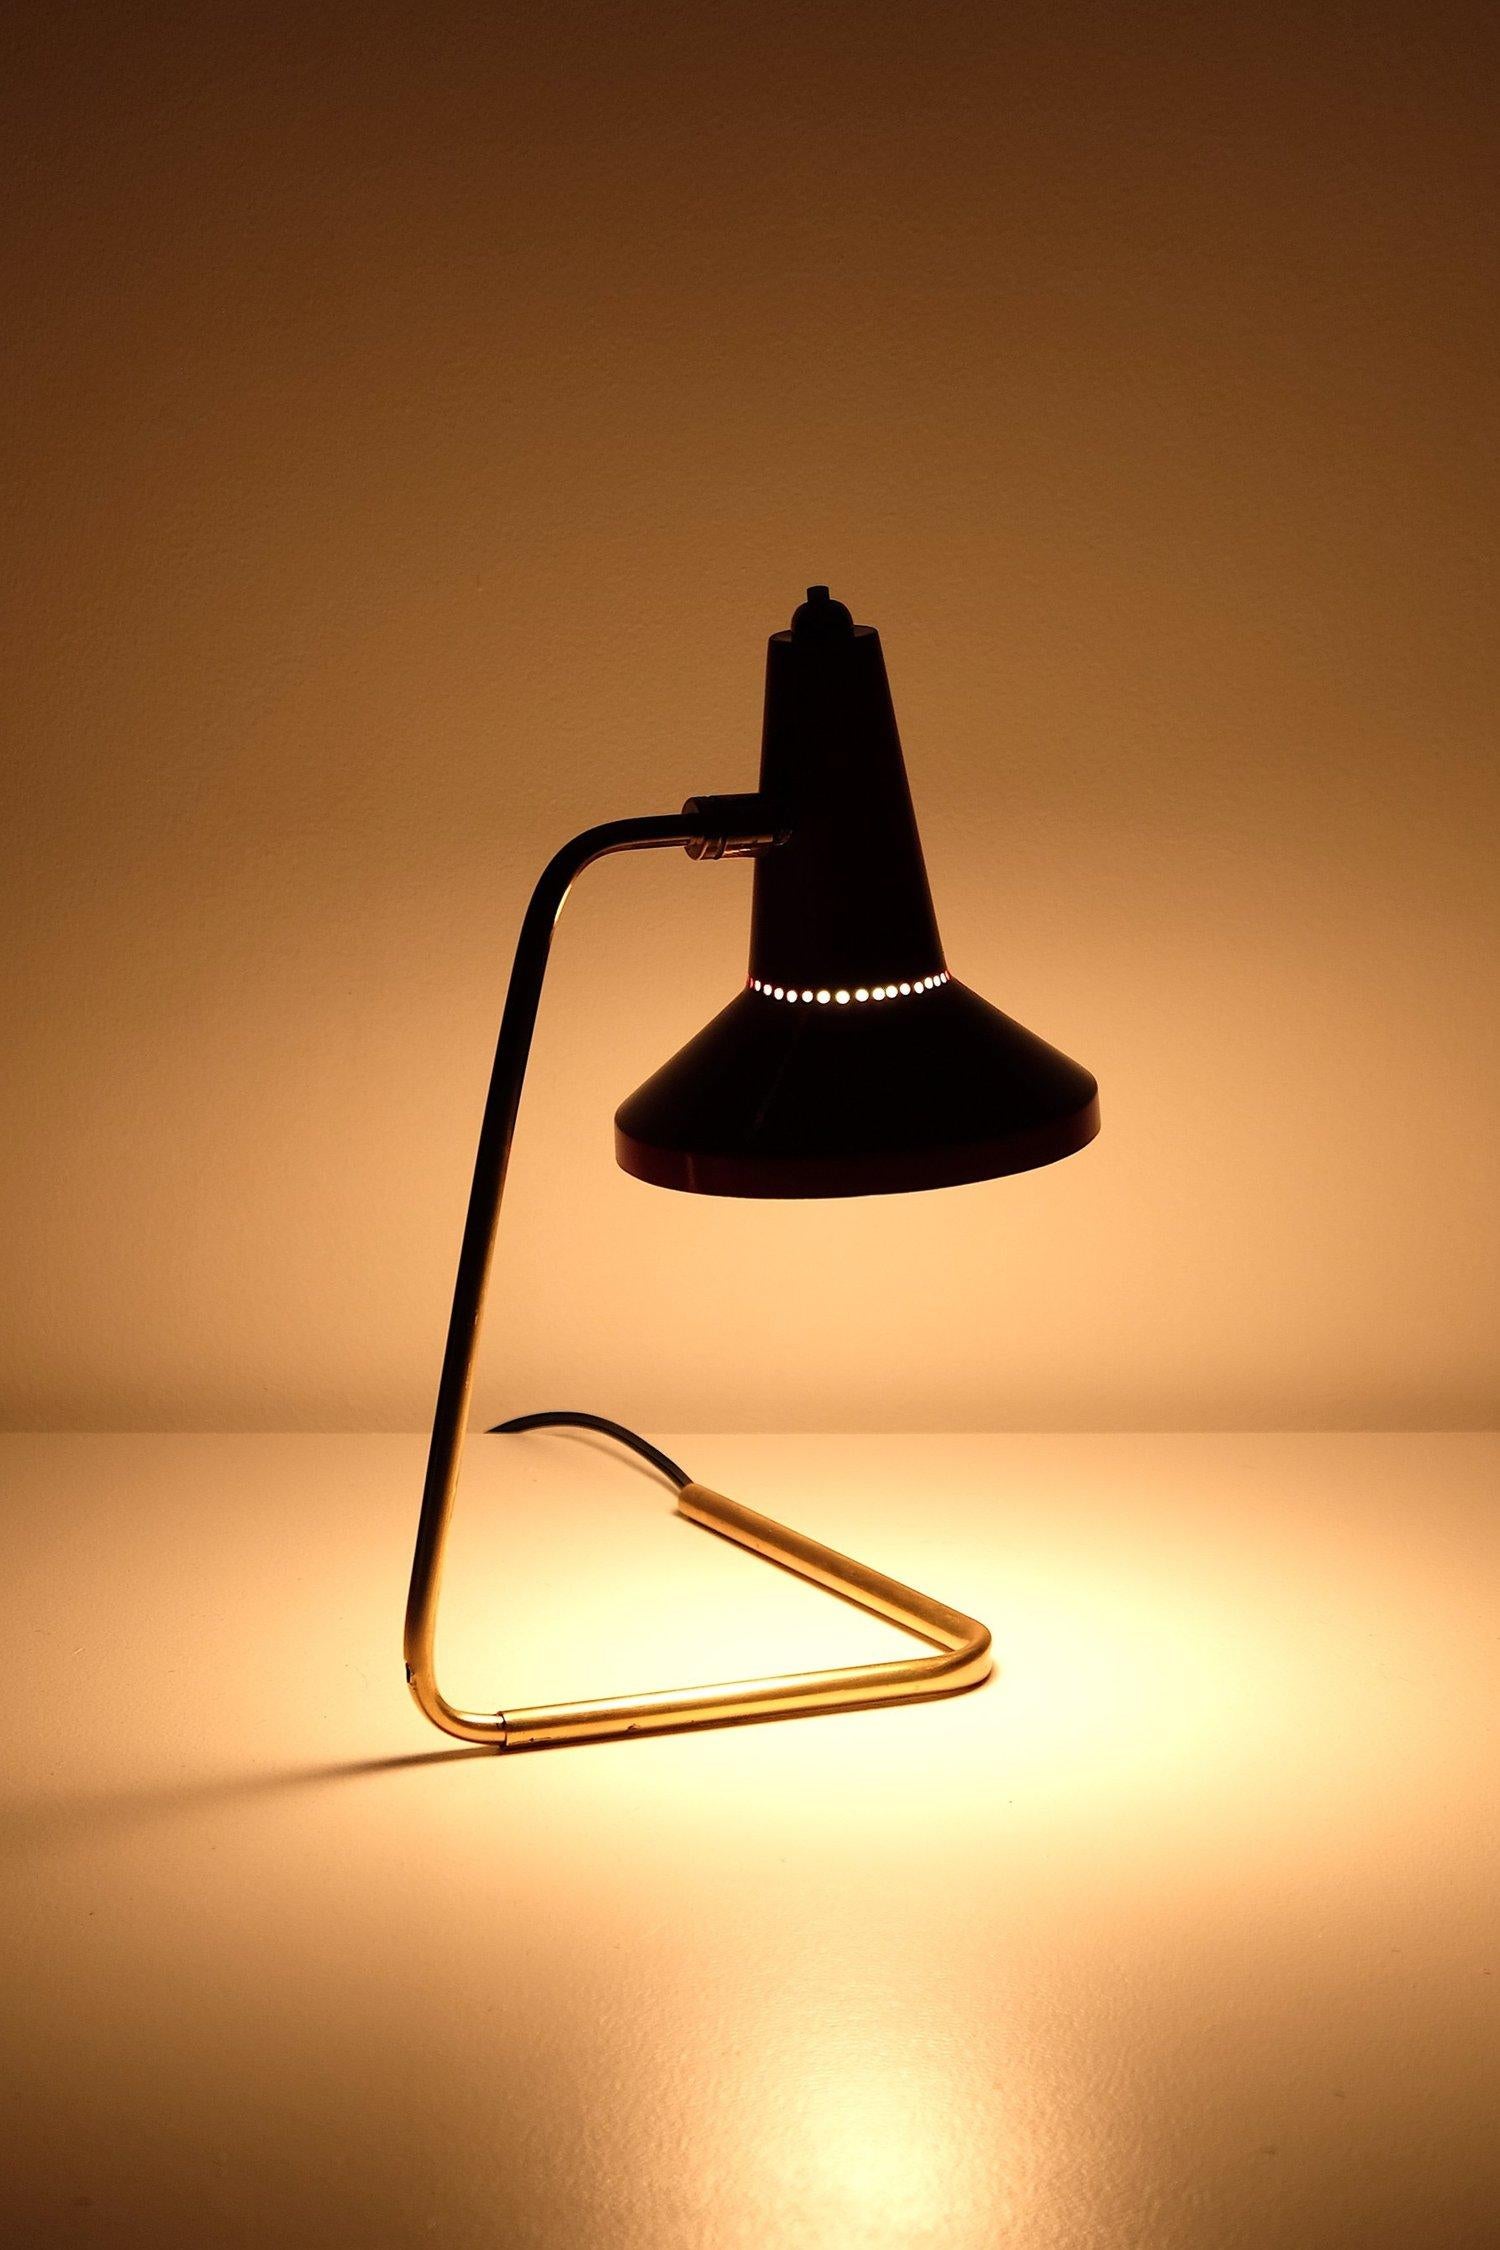 Rare Giuseppe Ostuni Oluce desk lamp #223 made in Italy. Lacquered aluminium shade, brass stem and foot. 40 watts max E-12 North American bulb recommended or higher if LED/CFL.

Rewired with a E-12 candelabra base socket, 18/2 black plastic cord